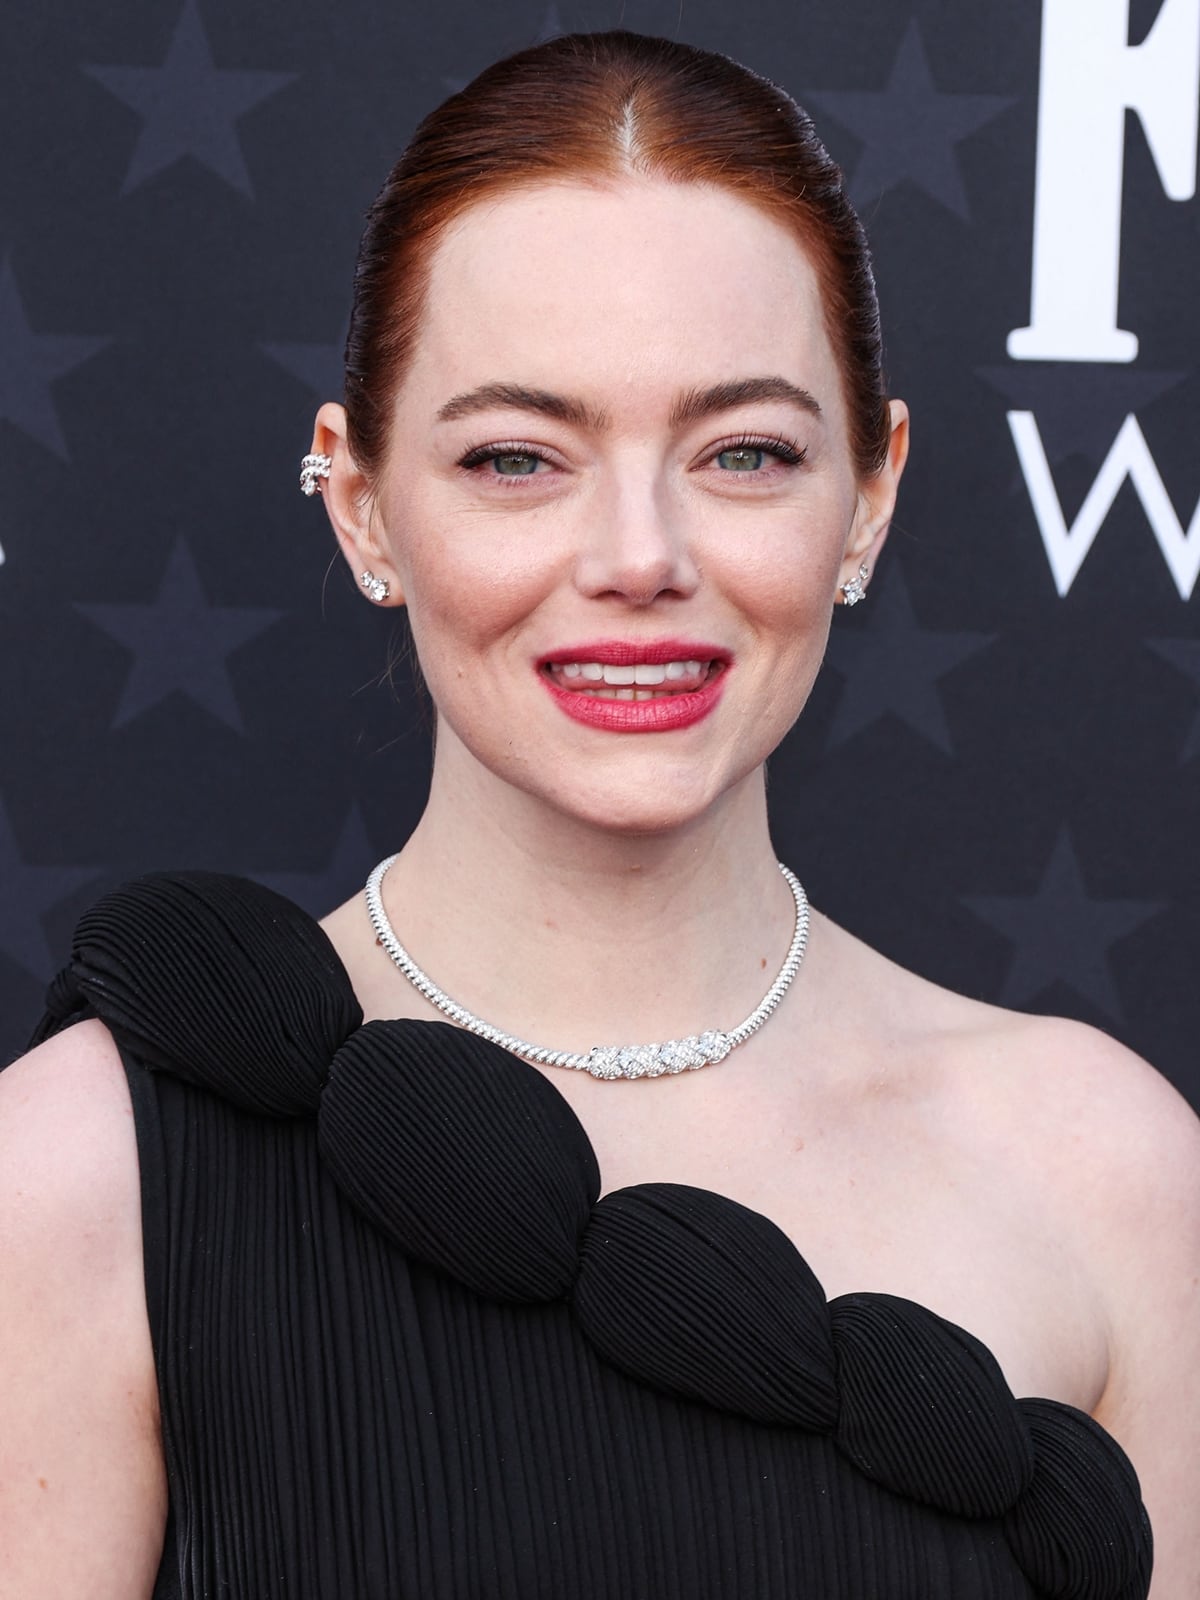 Emma Stone's vibrant red hair is styled into a sleek bun, complementing the sophisticated makeup by Rachel Goodwin, featuring warm brown eyeshadow and red sheer matte lipstick, accentuating Stone's natural beauty